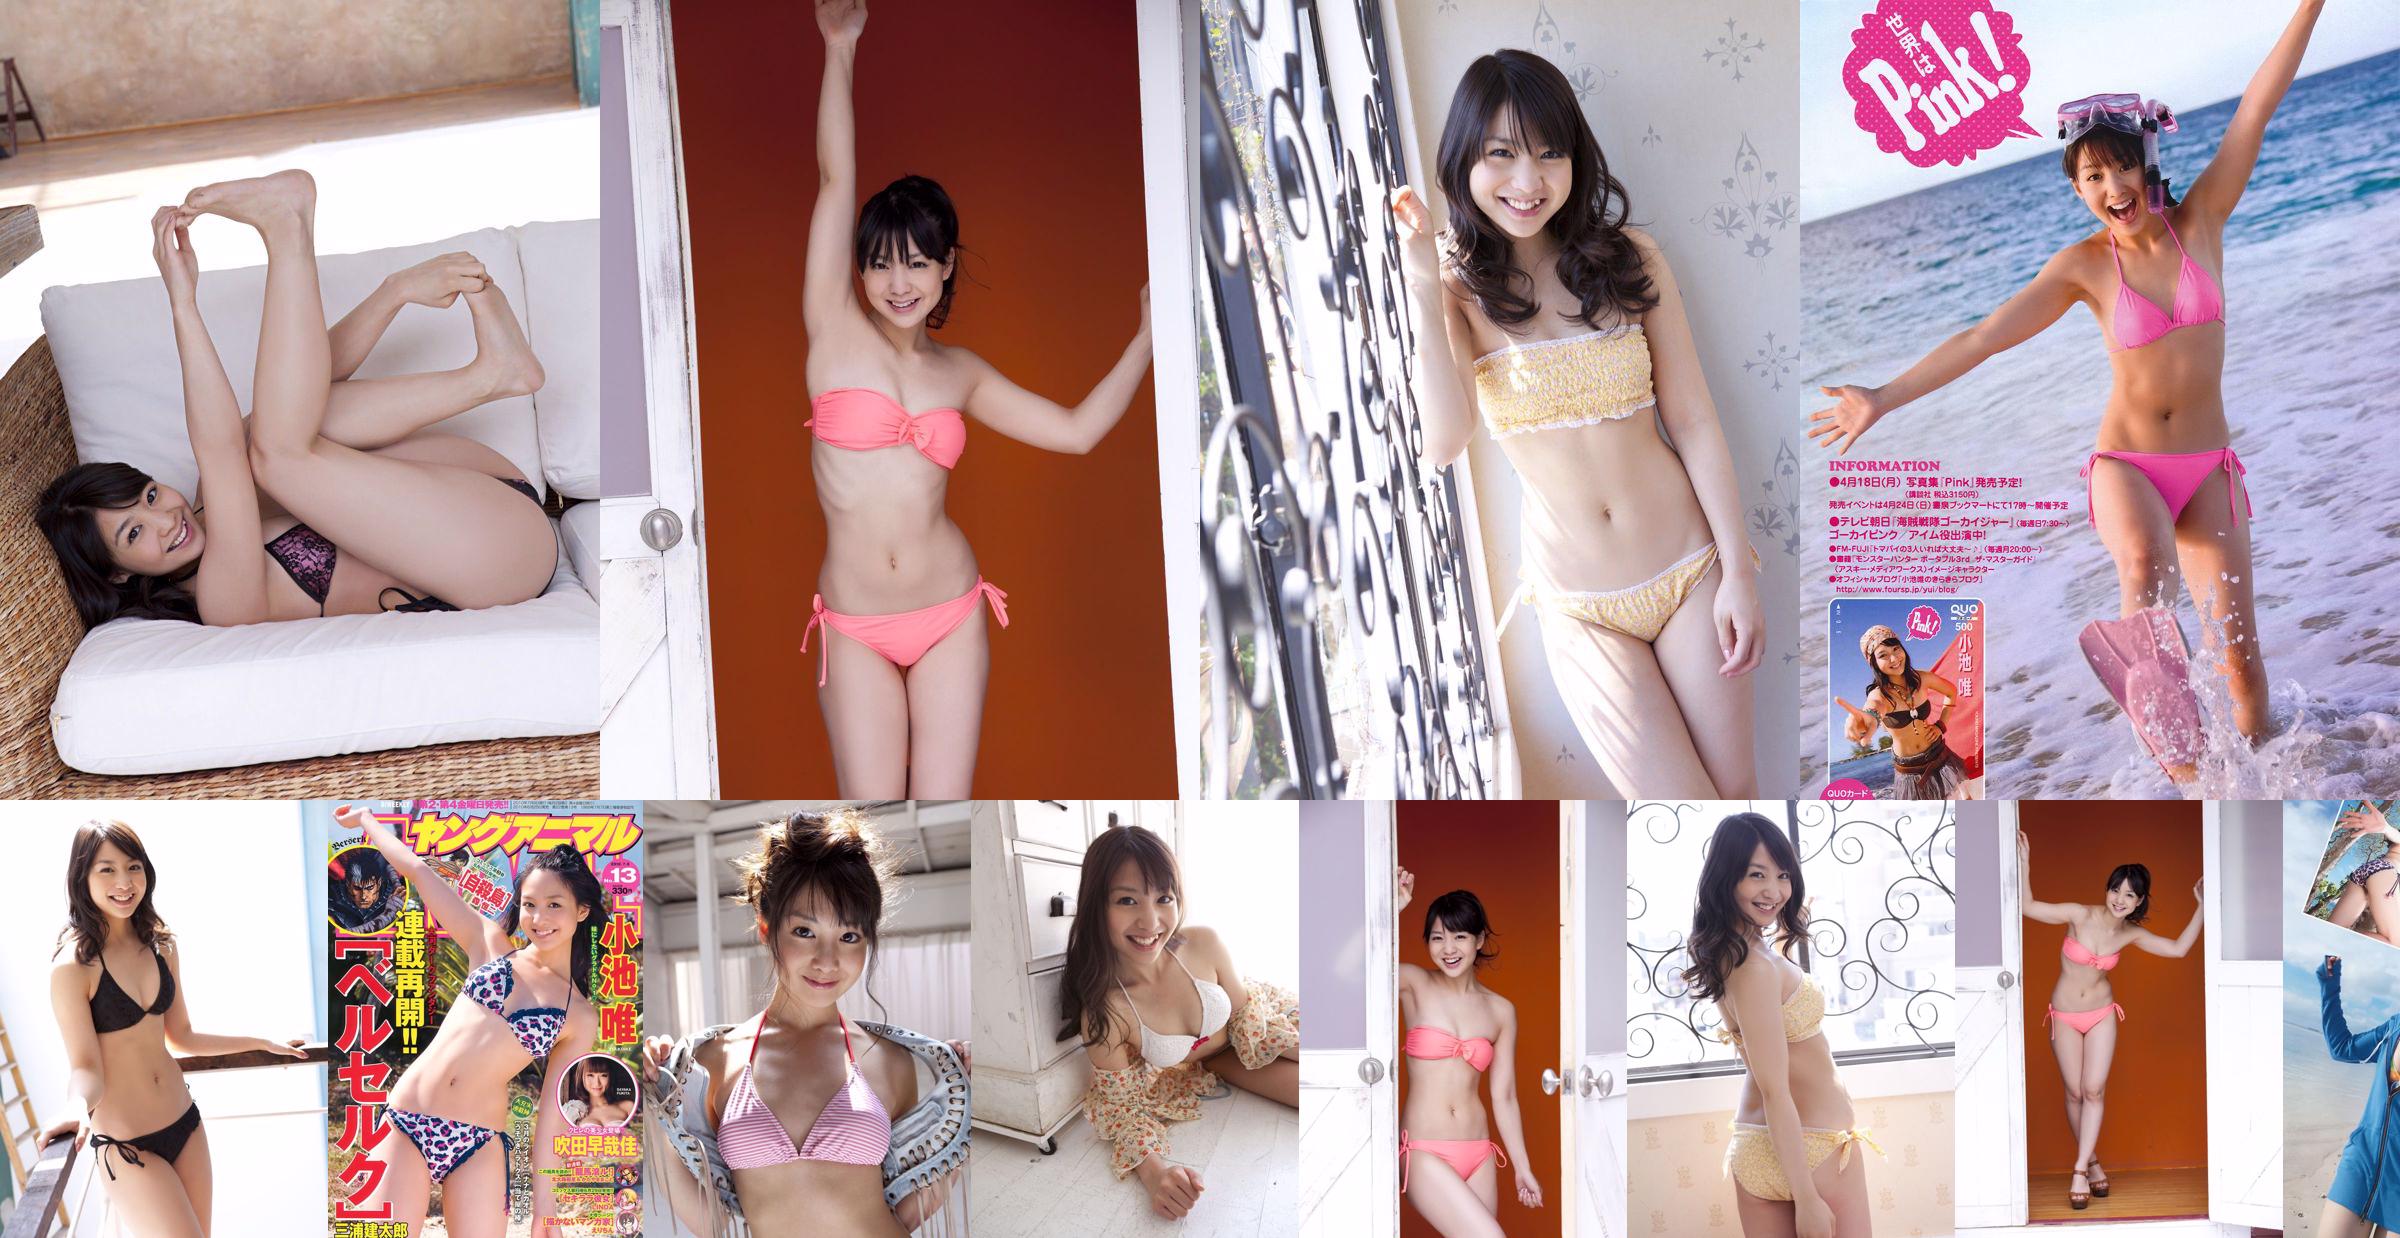 Yui Koike "FOREVER 21" [Sabra.net] Cover Girl No.75a14b Page 1